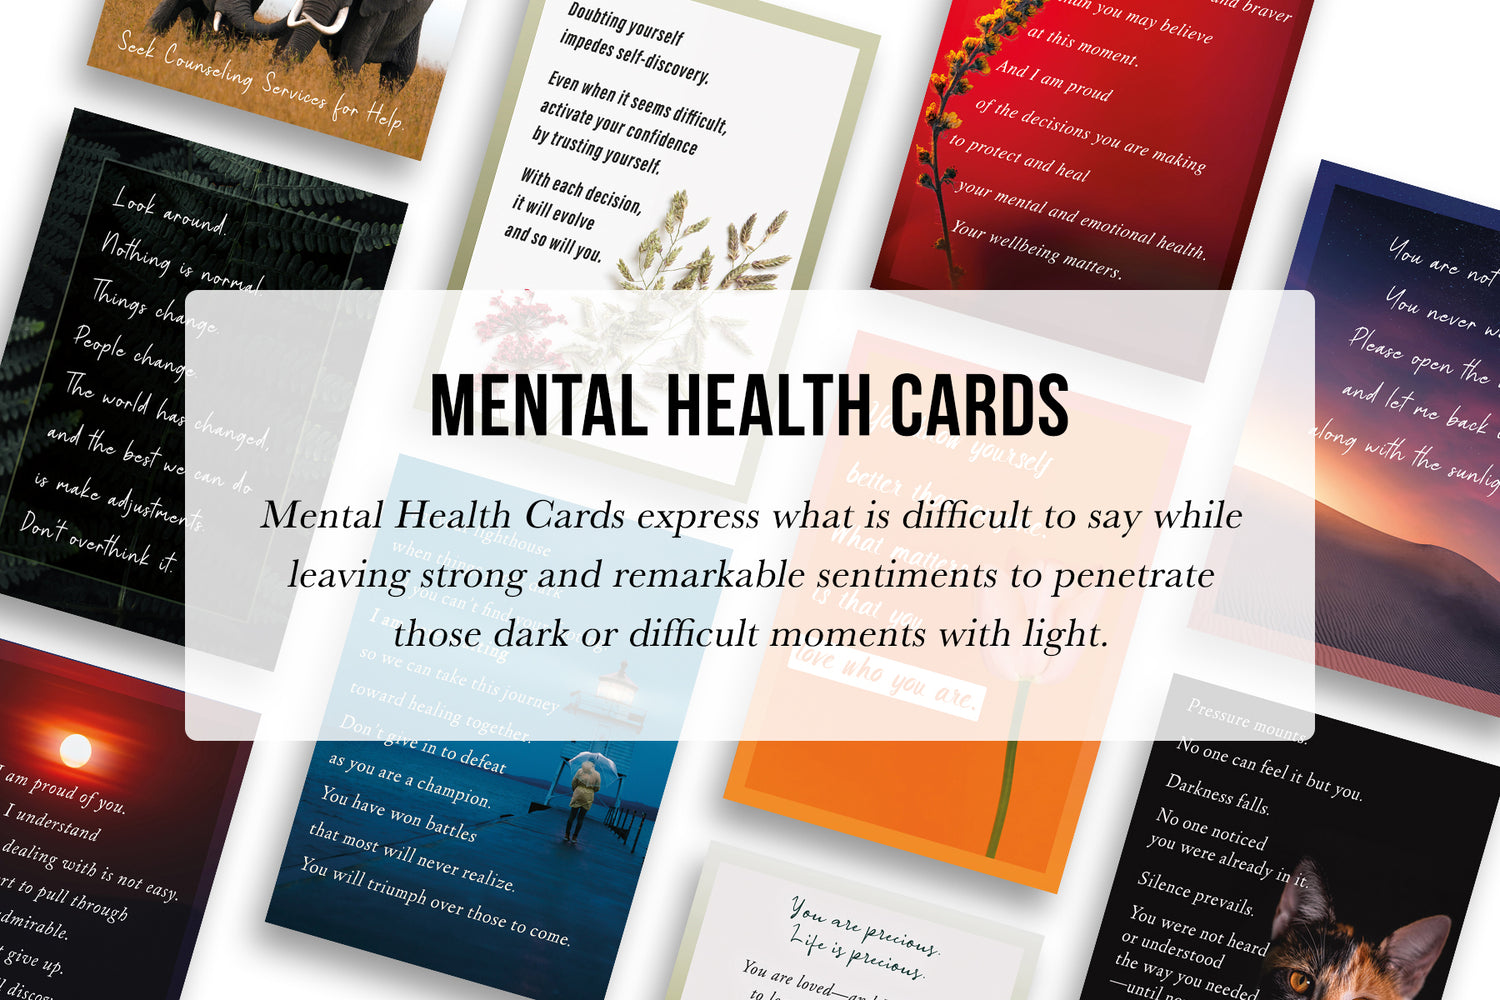 A new line of Mental Health Cards with uplifting messages that support those with mental health challenges.